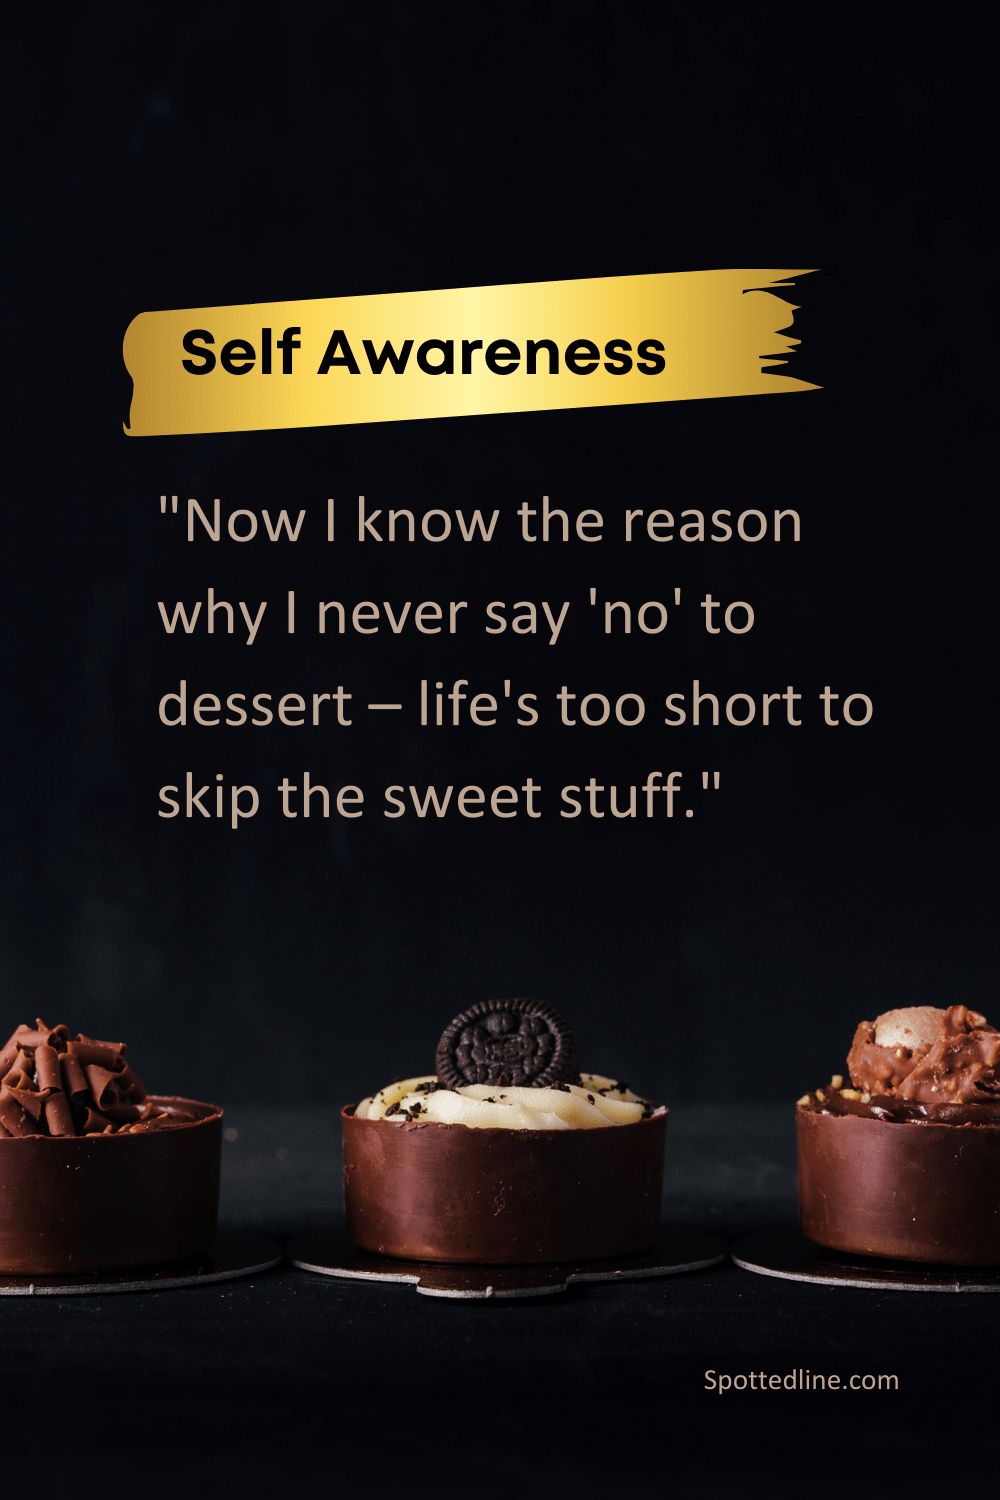 Self-Awareness-and-Dessert-Quotes